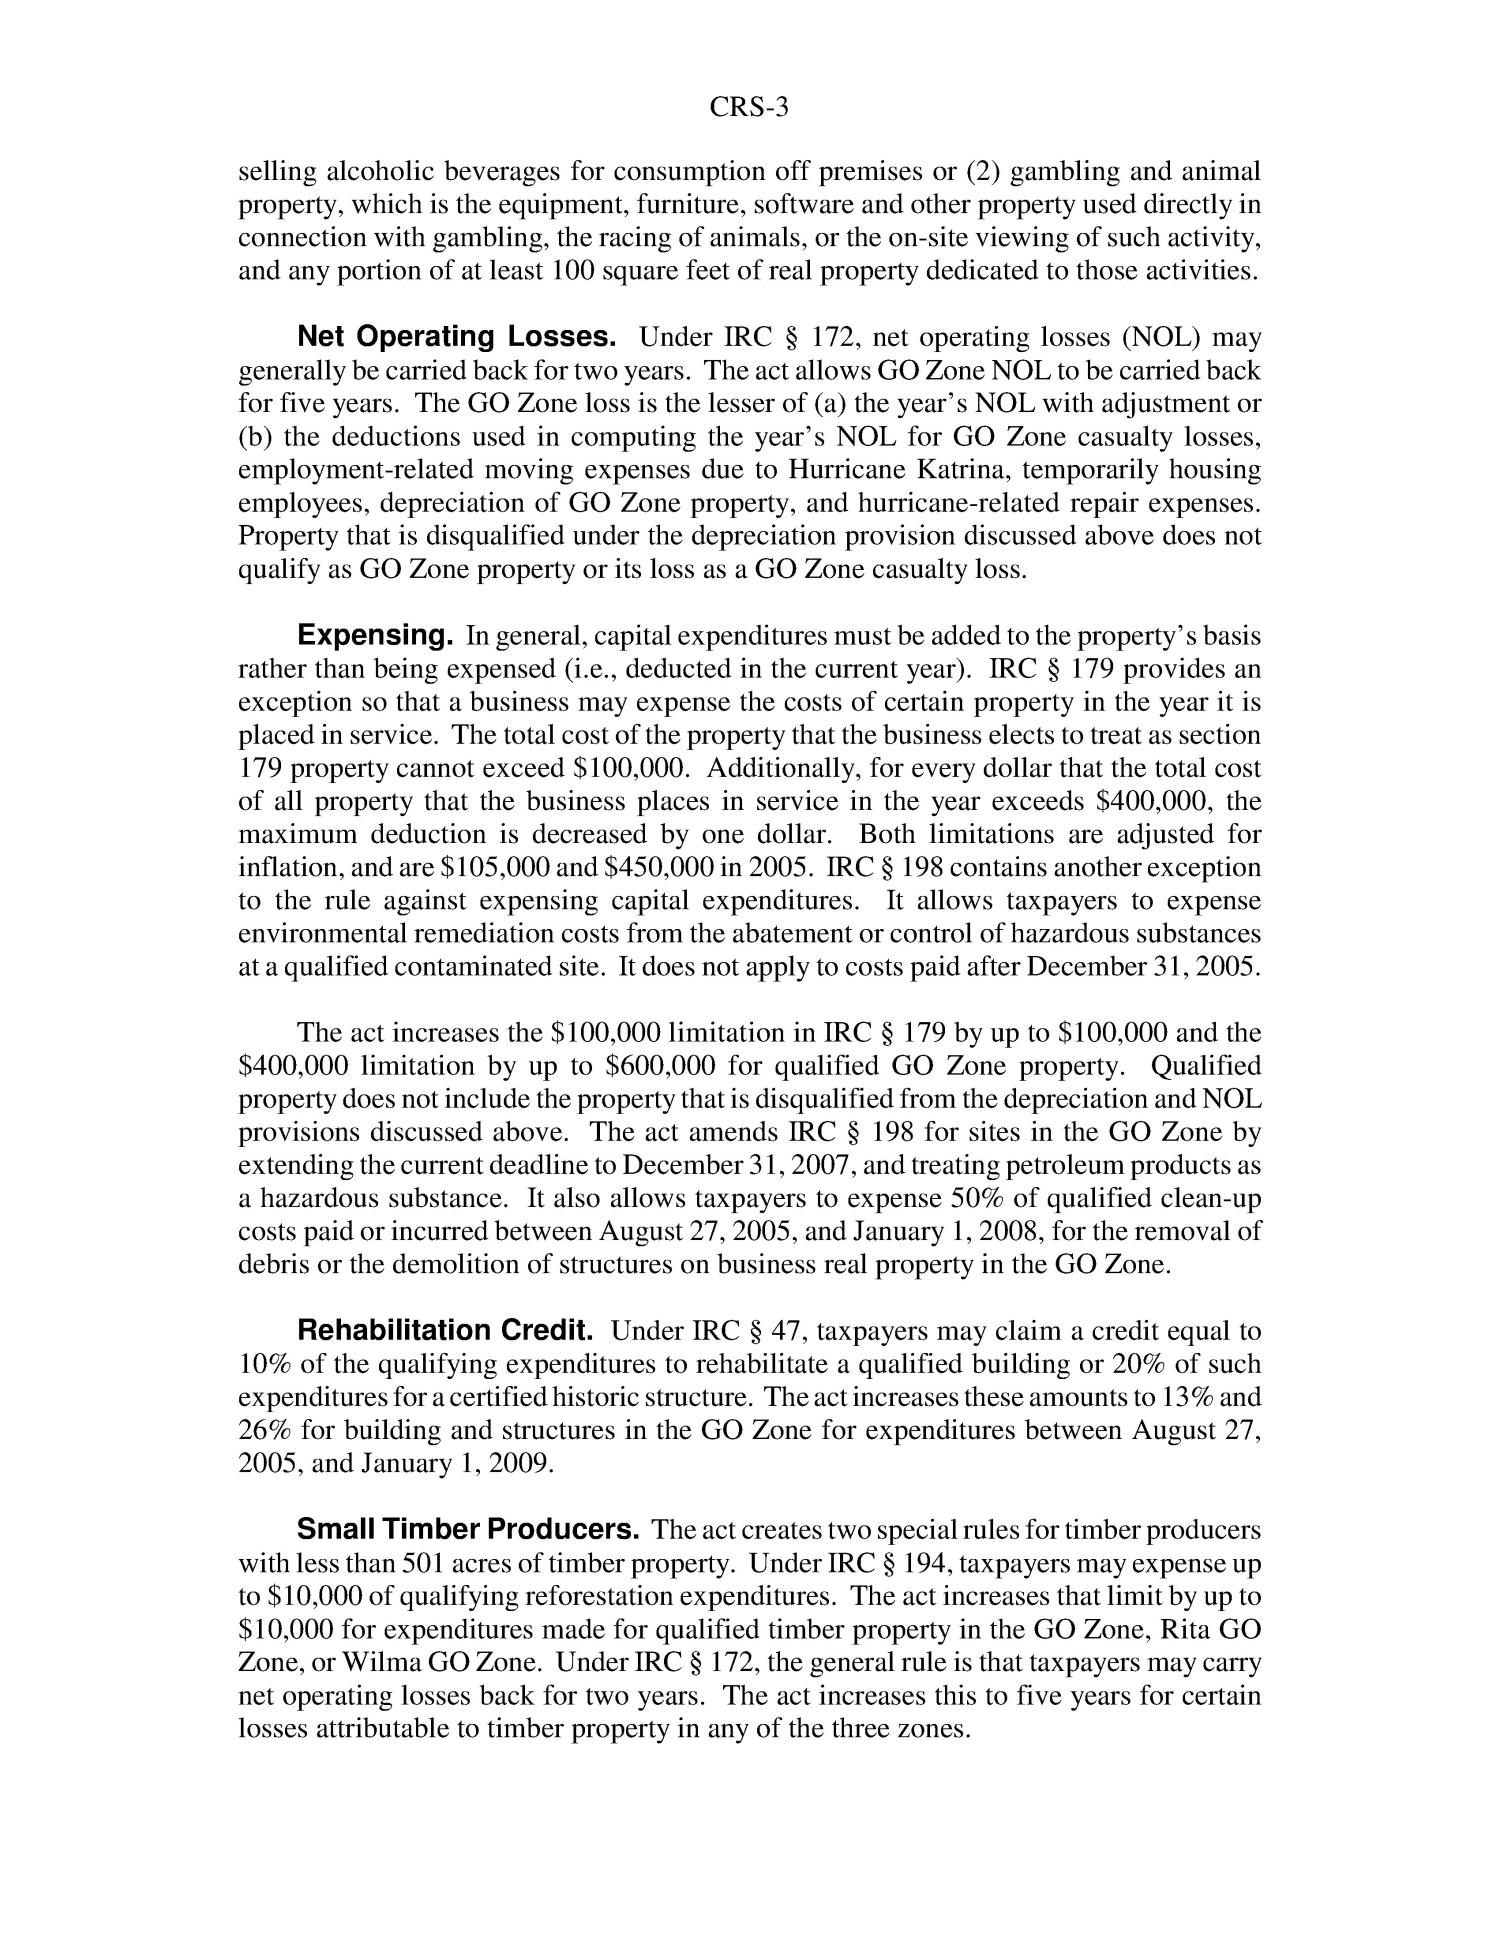 The Gulf Opportunity Zone Act of 2005
                                                
                                                    [Sequence #]: 3 of 6
                                                